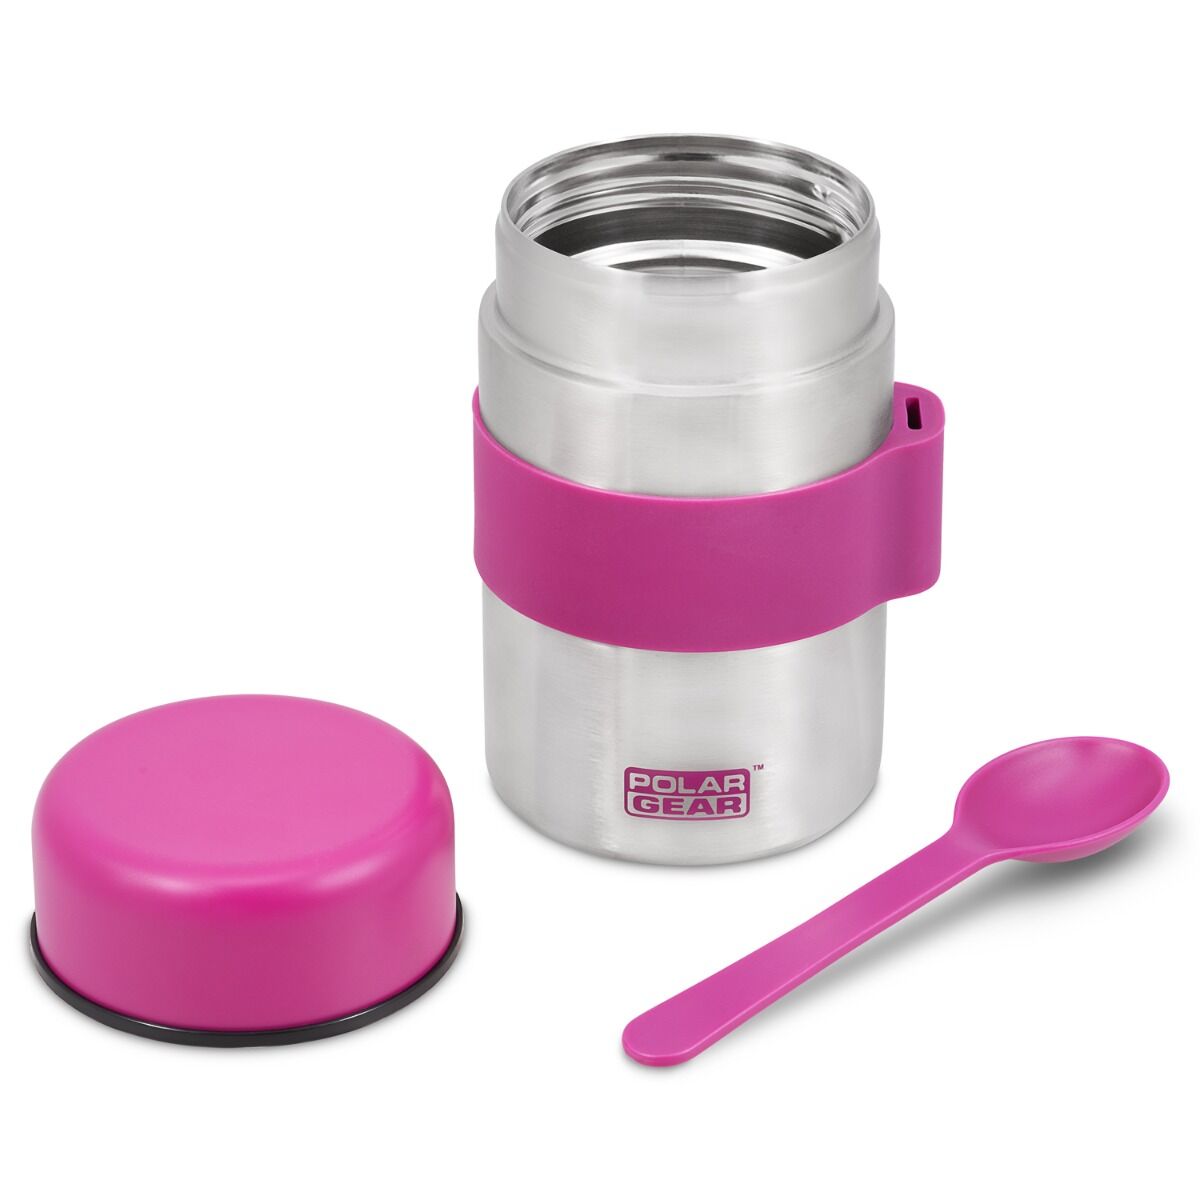 https://www.polargear.com/media/catalog/product/cache/original/insulated-food-flask-%E2%80%93-triple-layer-stainless-steel-soup-food-container-with-spoon-berry,-400ml-1.jpg